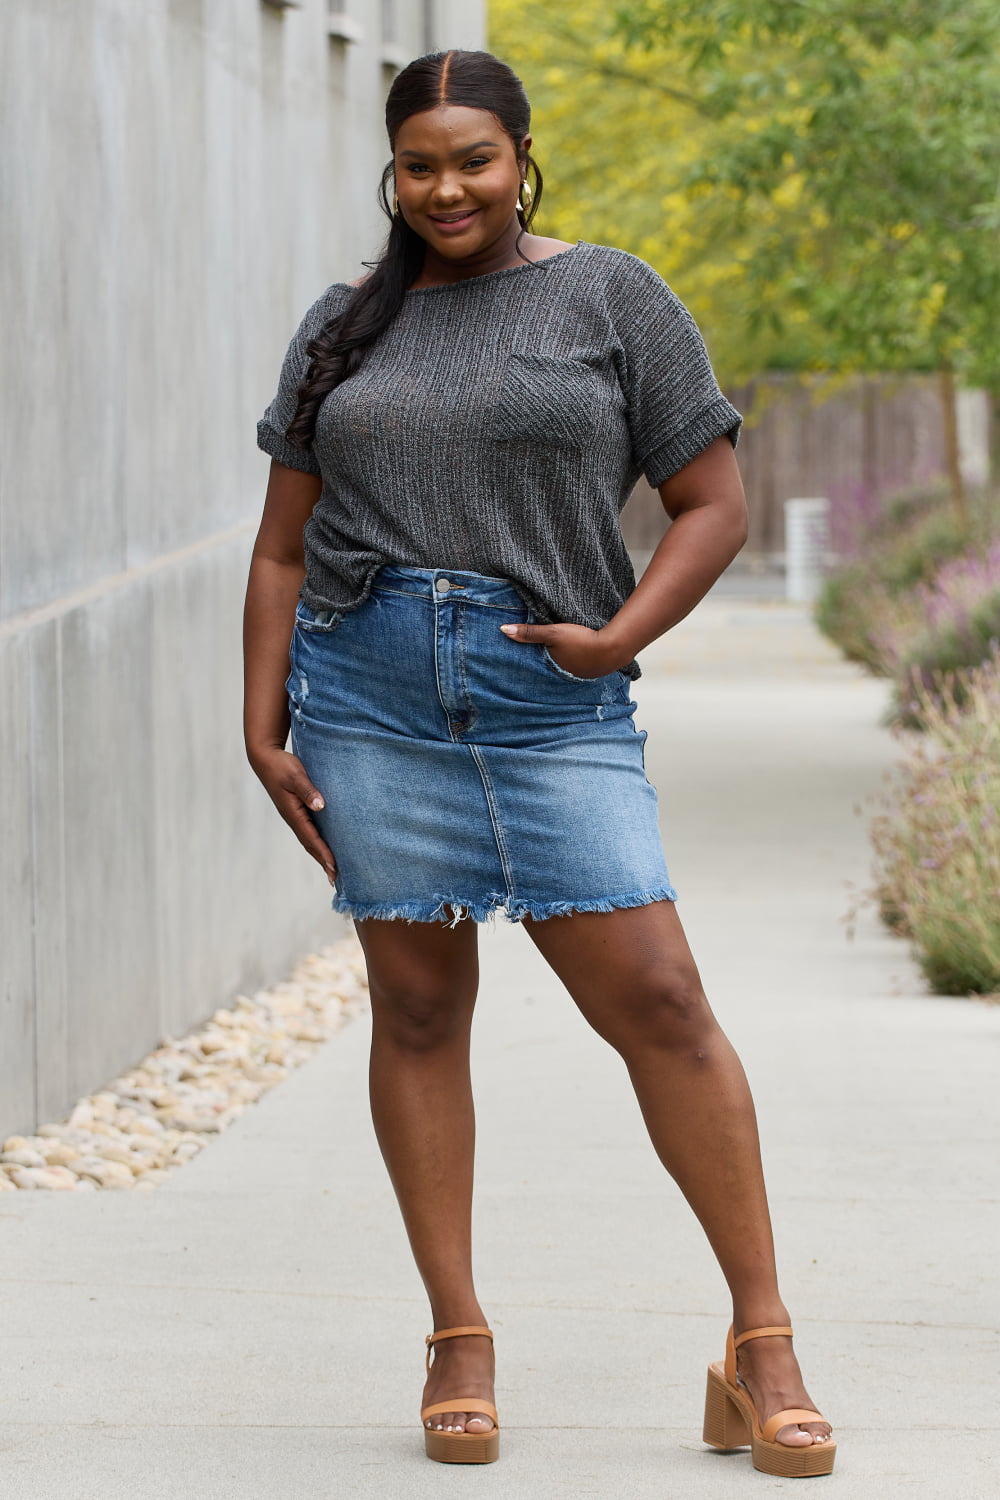 Chunky Knit Short Sleeve Top in Gray - Camis & Tops - Shirts & Tops - 9 - 2024